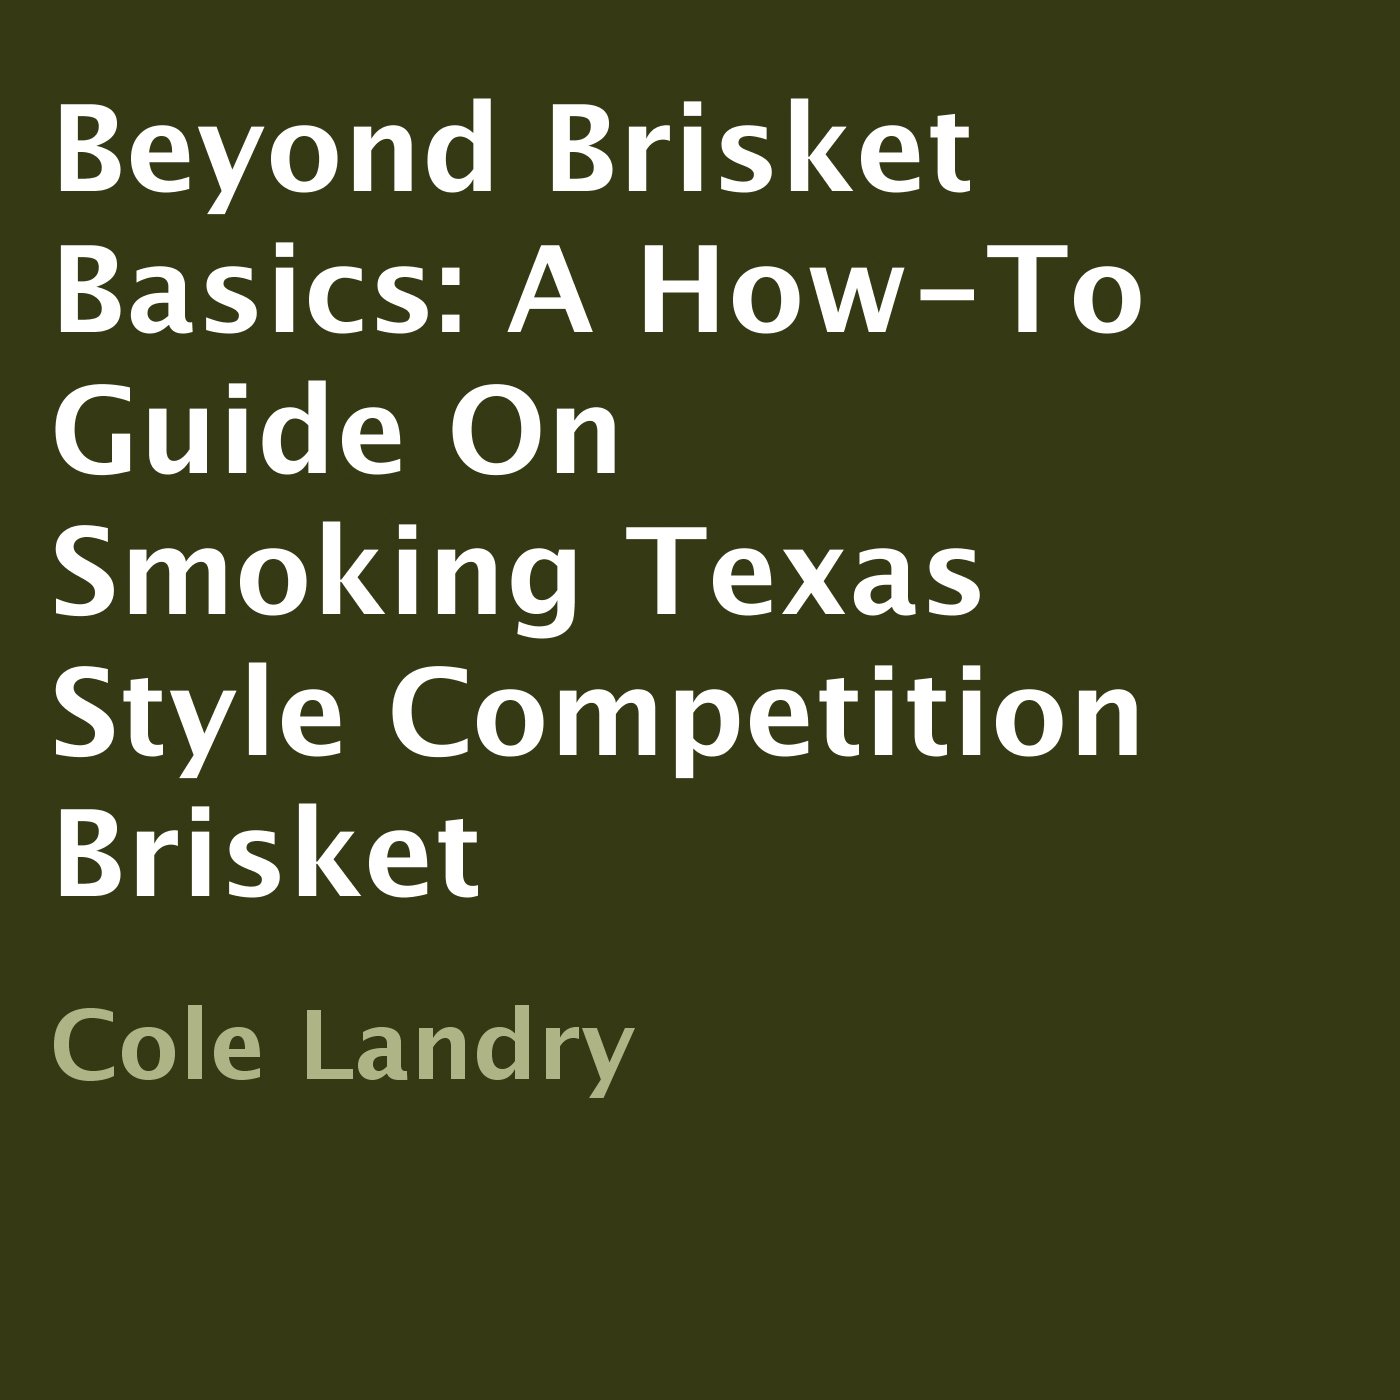 Beyond Brisket Basics: A How-To Guide On Smoking Texas Style Competition Brisket